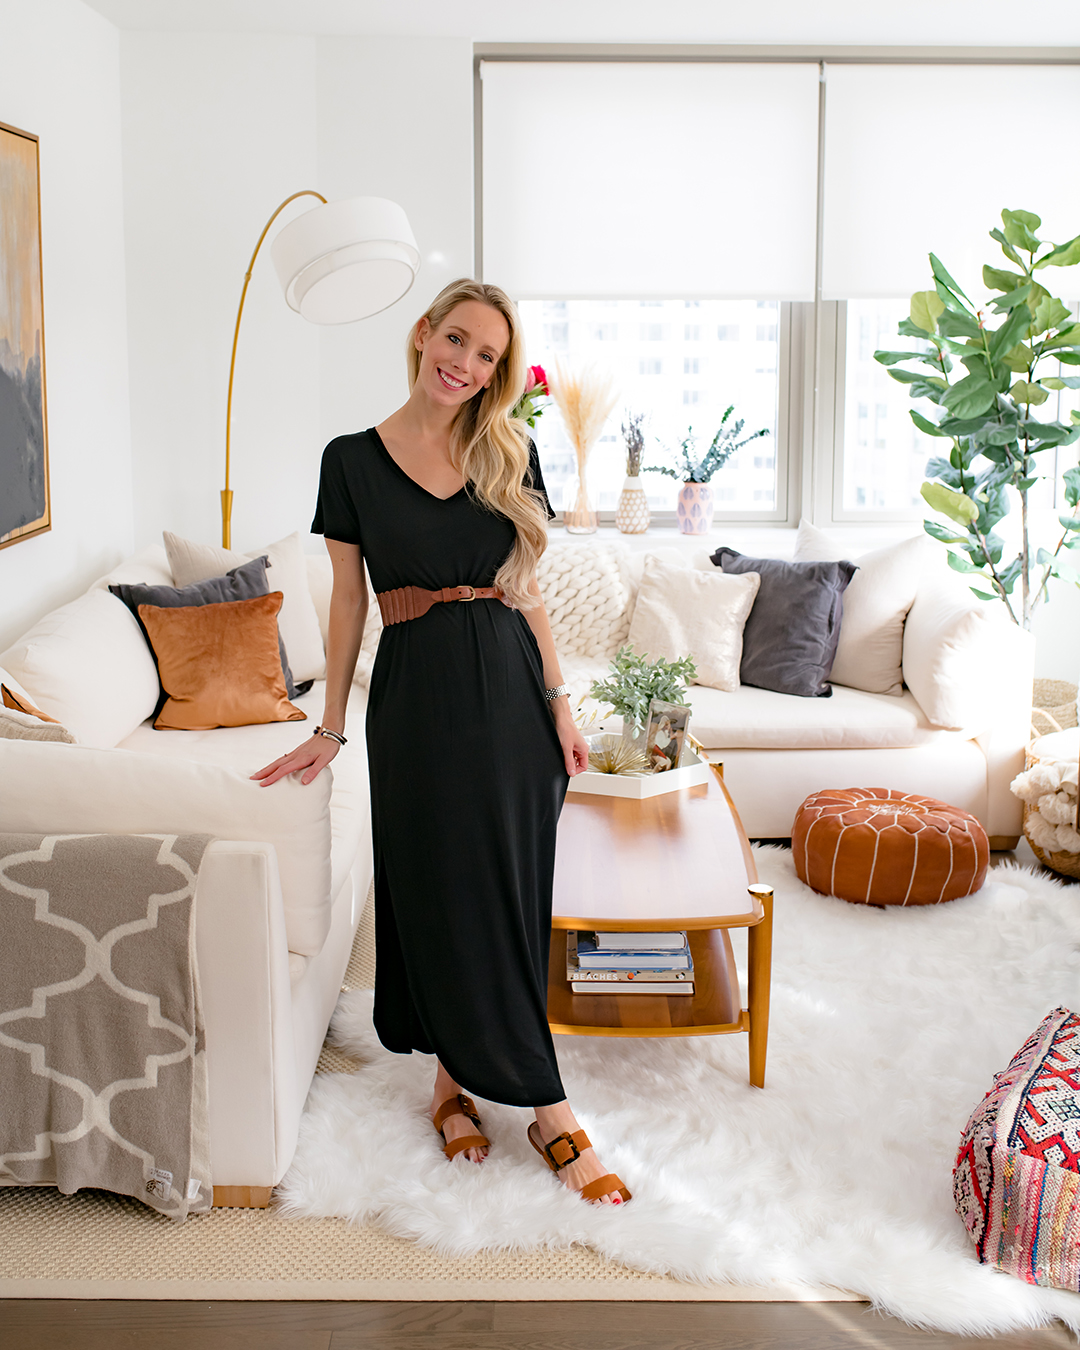 Katies Bliss Living Room Tour